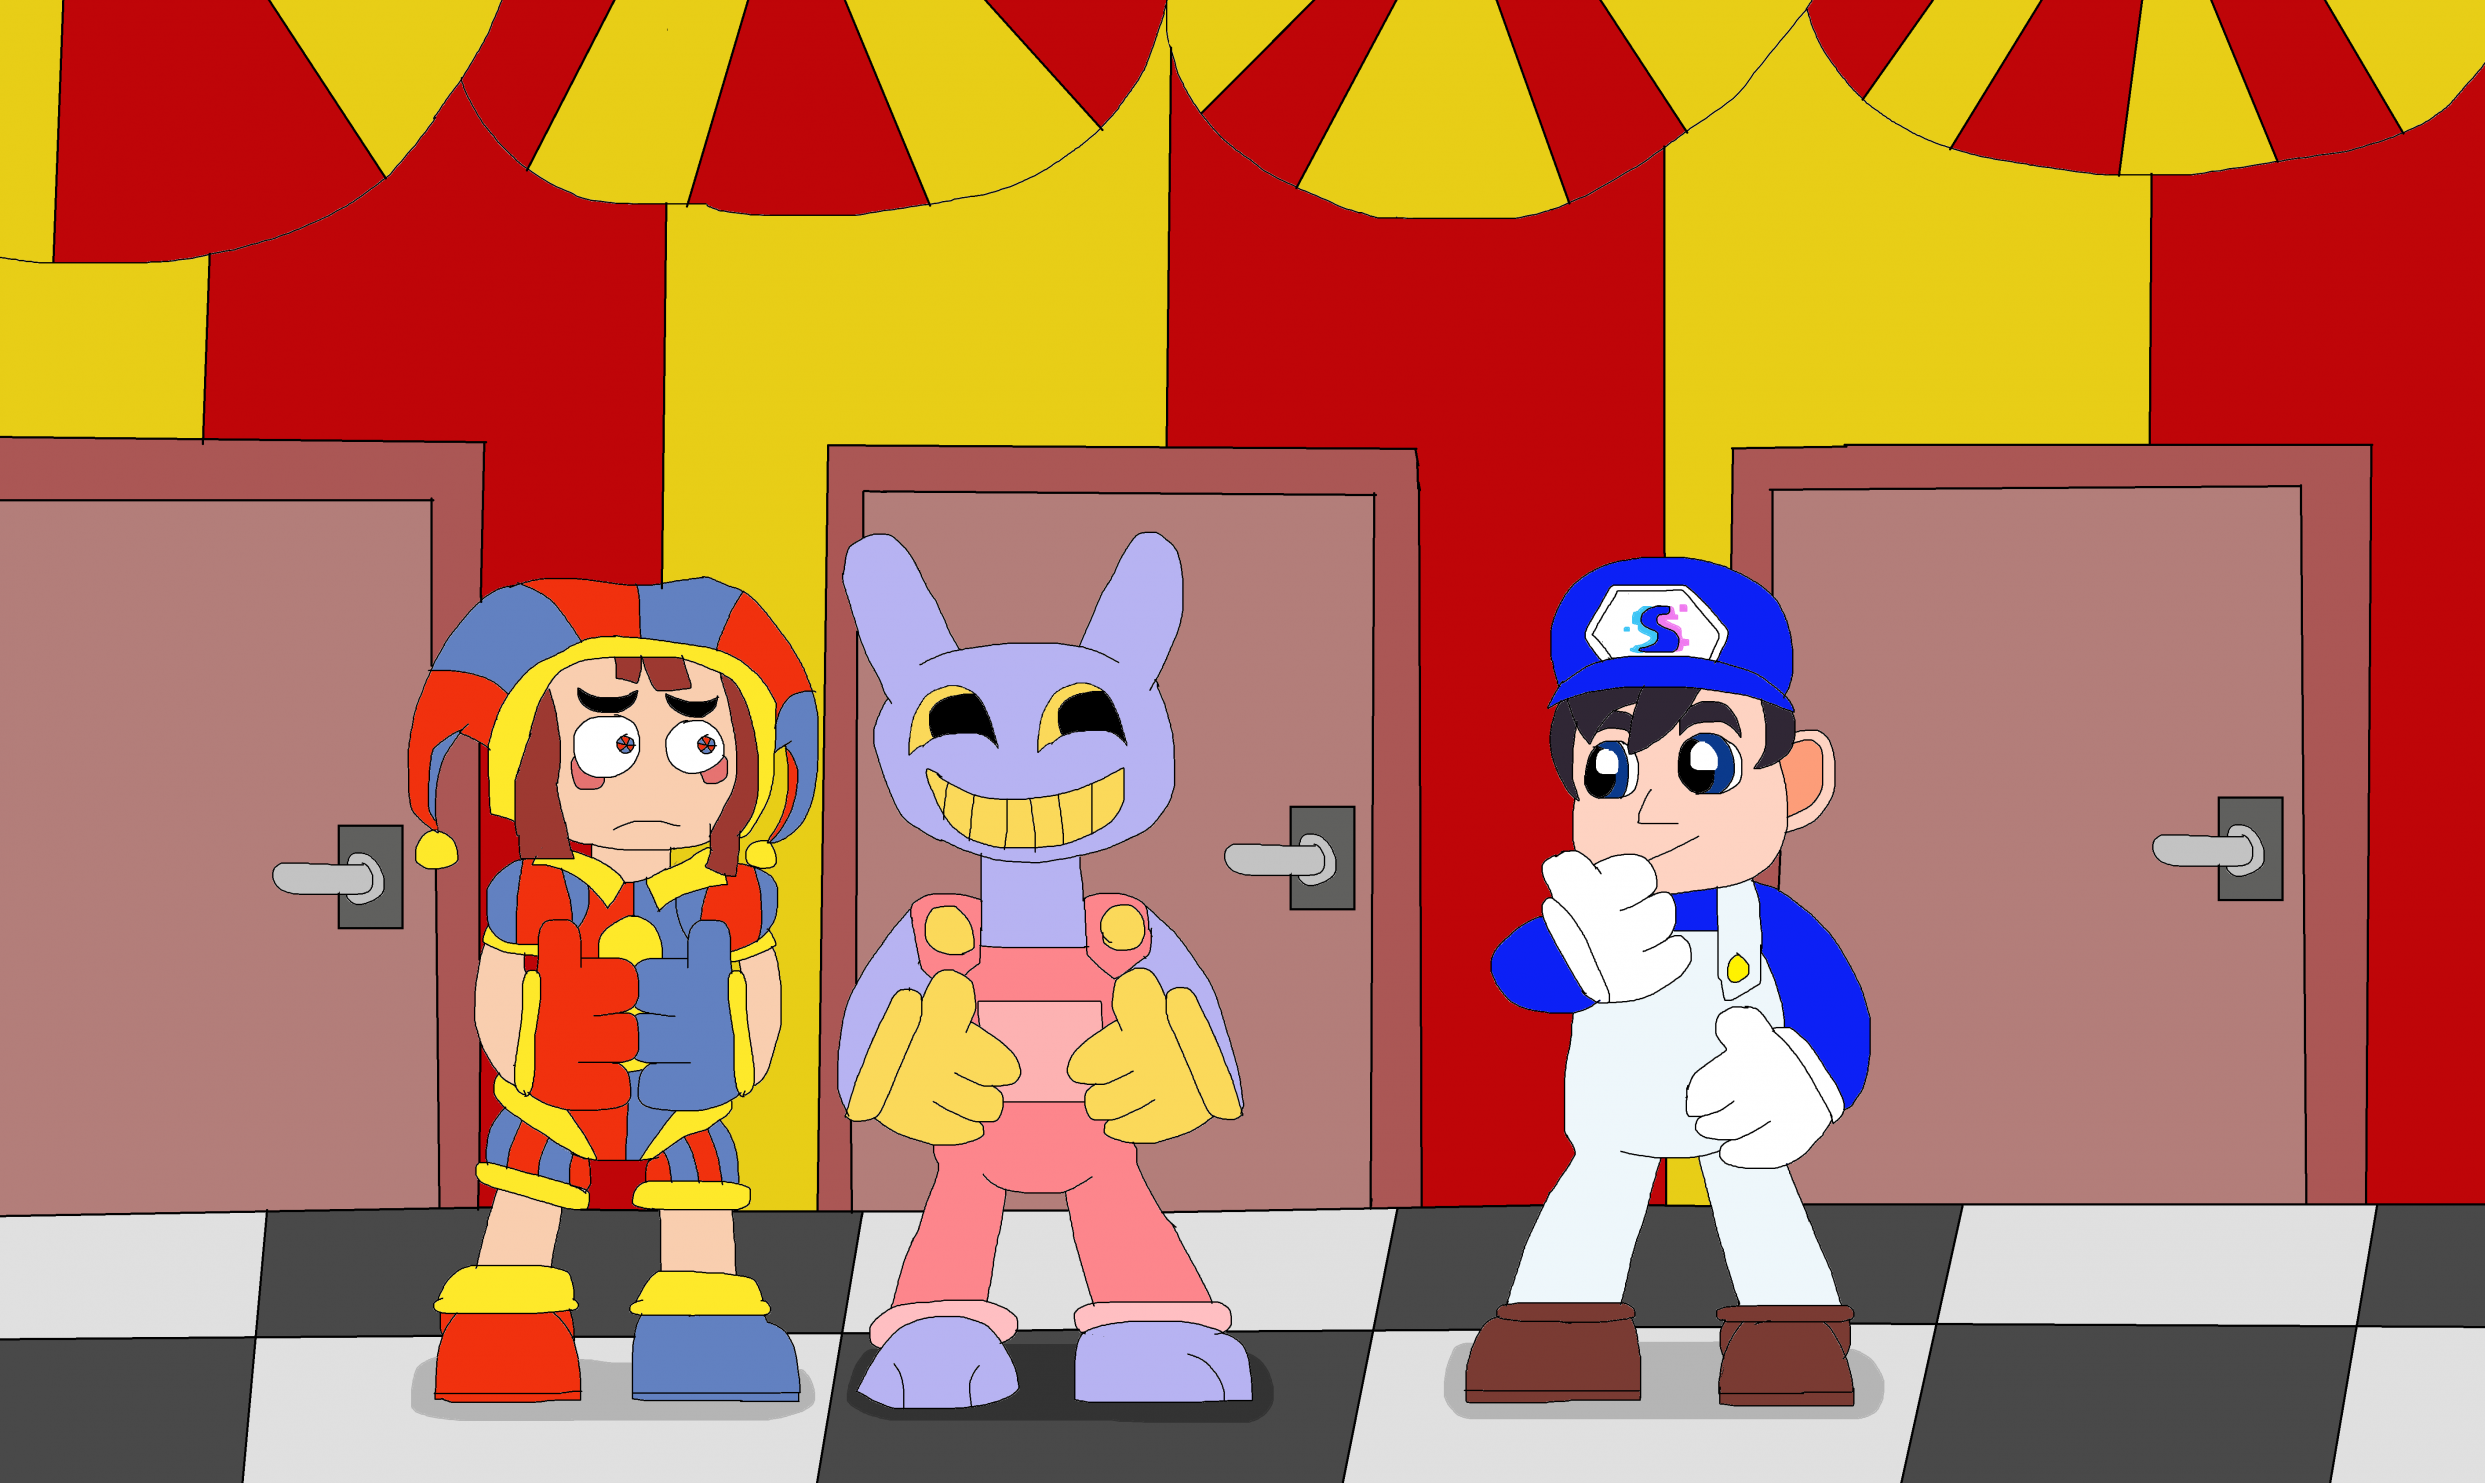 Crossover! What are your thoughts in The Amazing Digital Circus